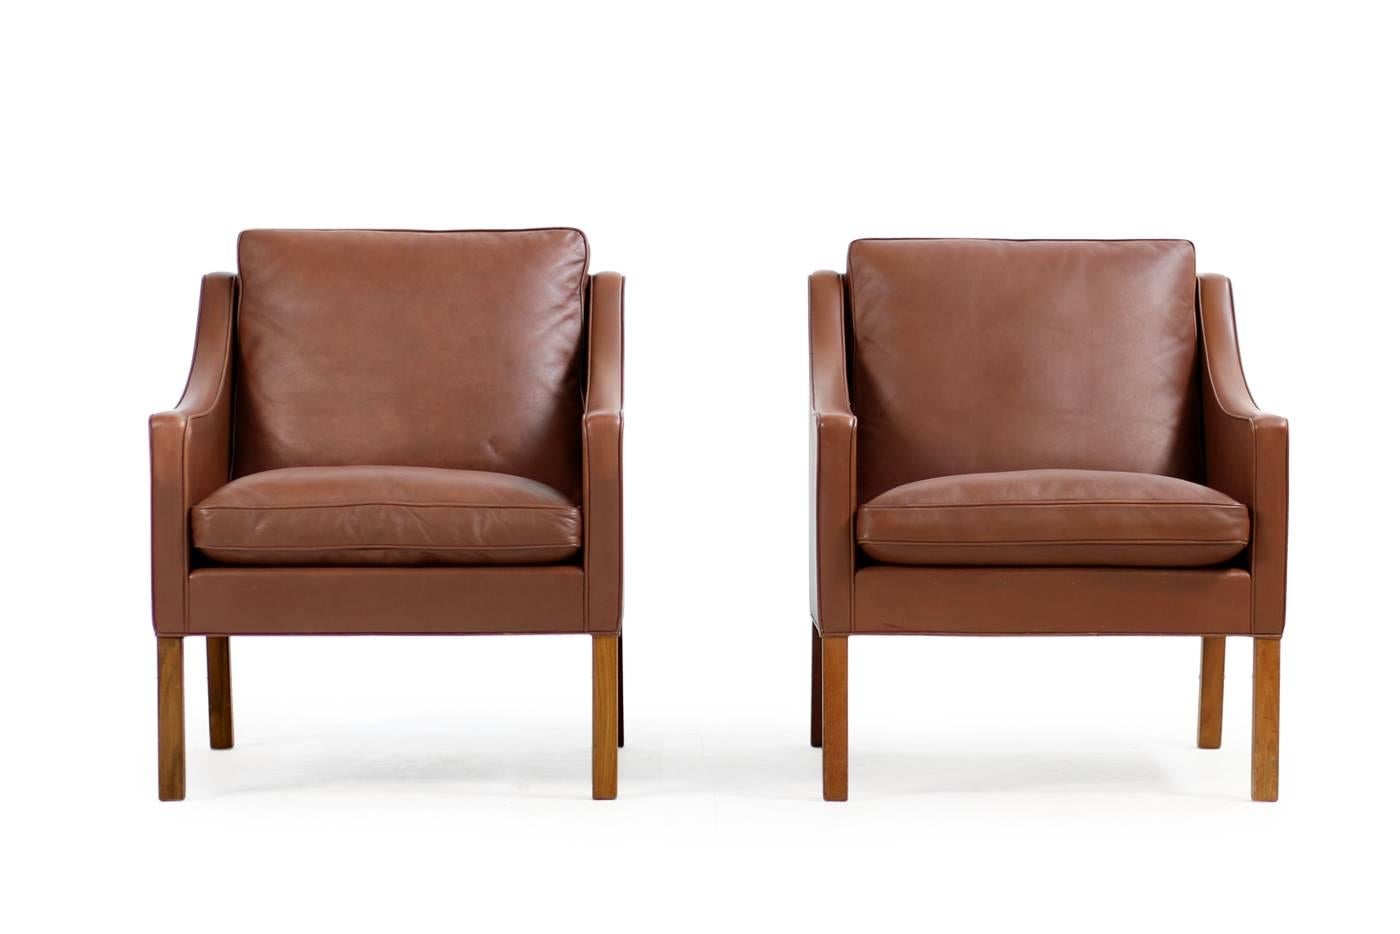 Mid-20th Century Pair of 1960s Borge Mogensen Mod. 2207 Leather Lounge Chairs Fredericia, Denmark